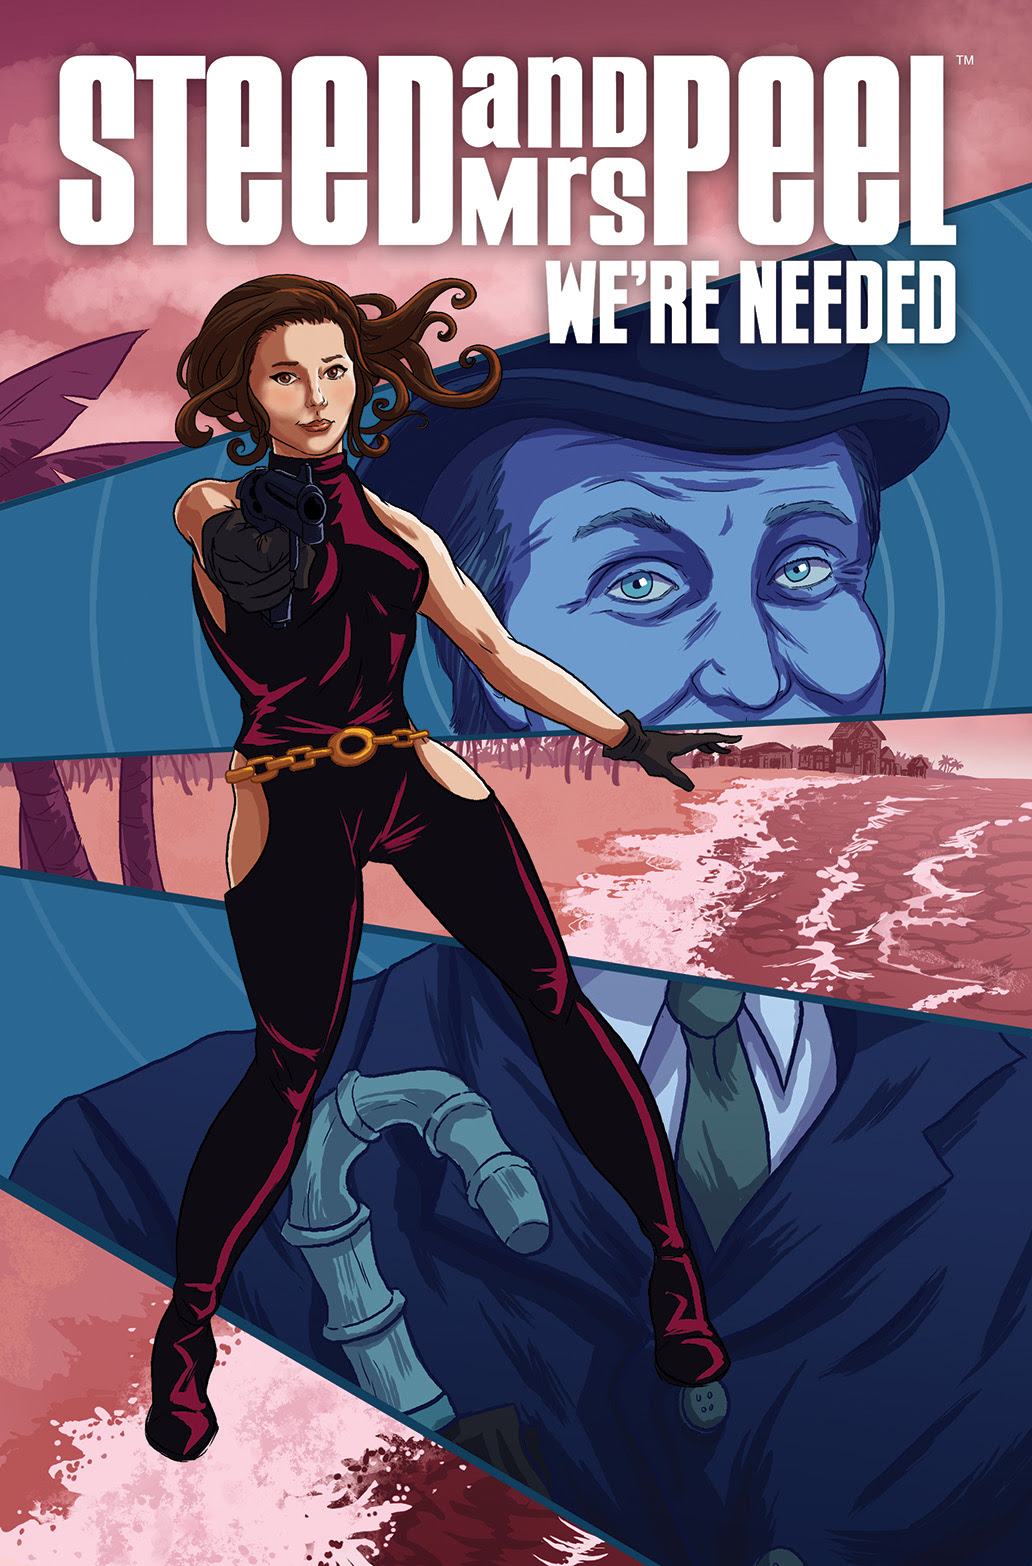 STEED AND MRS. PEEL: WE'RE NEEDED #3 Cover by Kim Herbst